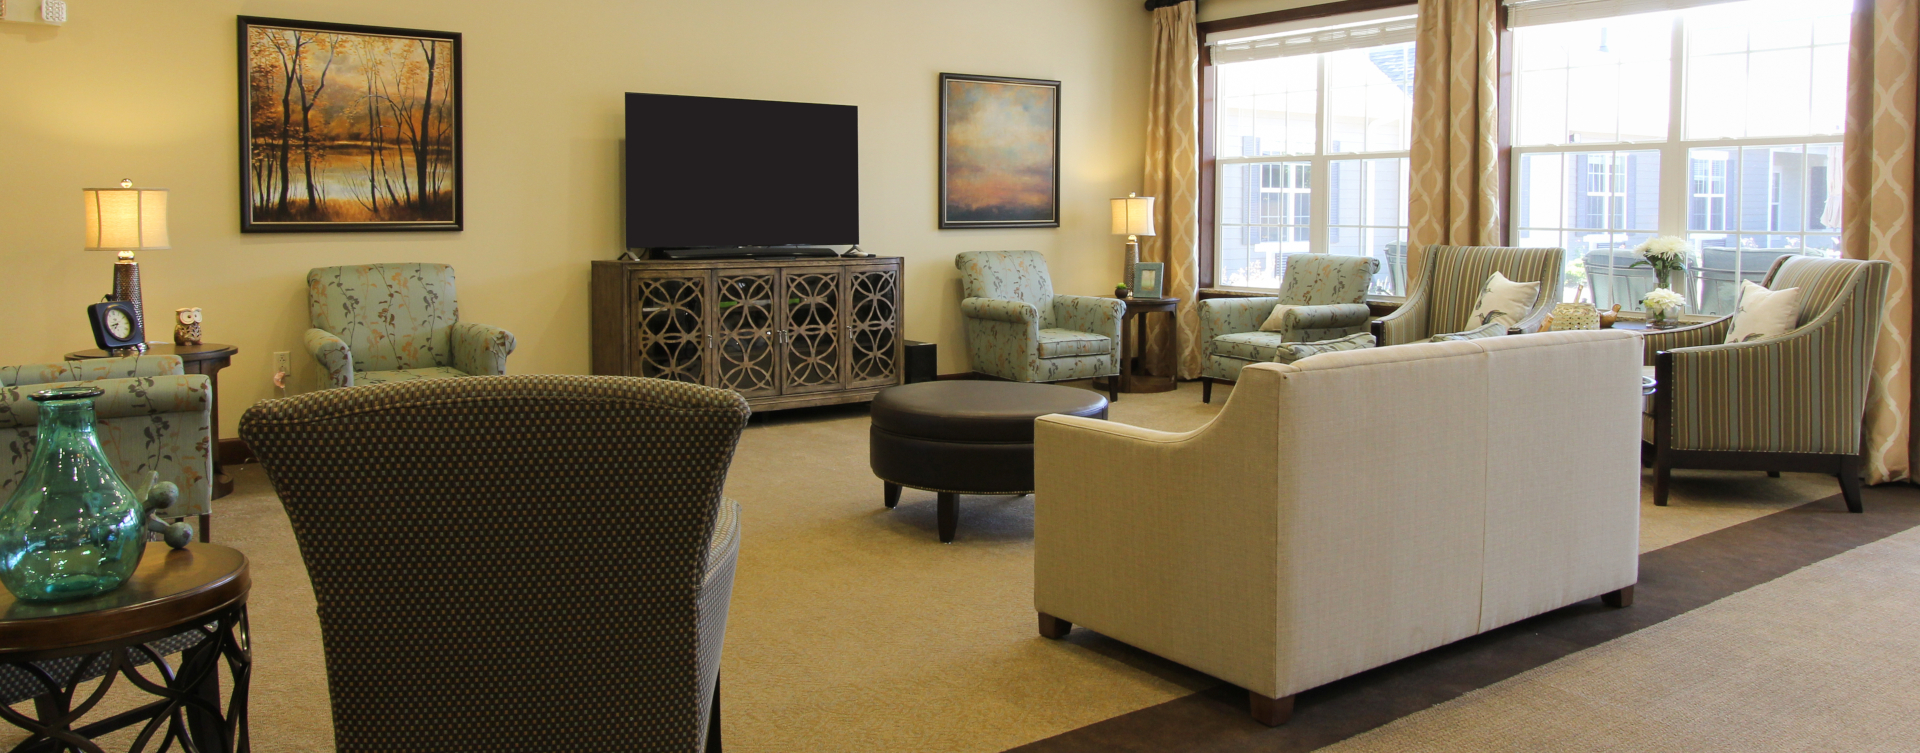 Socialize with friends in the living room at Bickford of Tinley Park